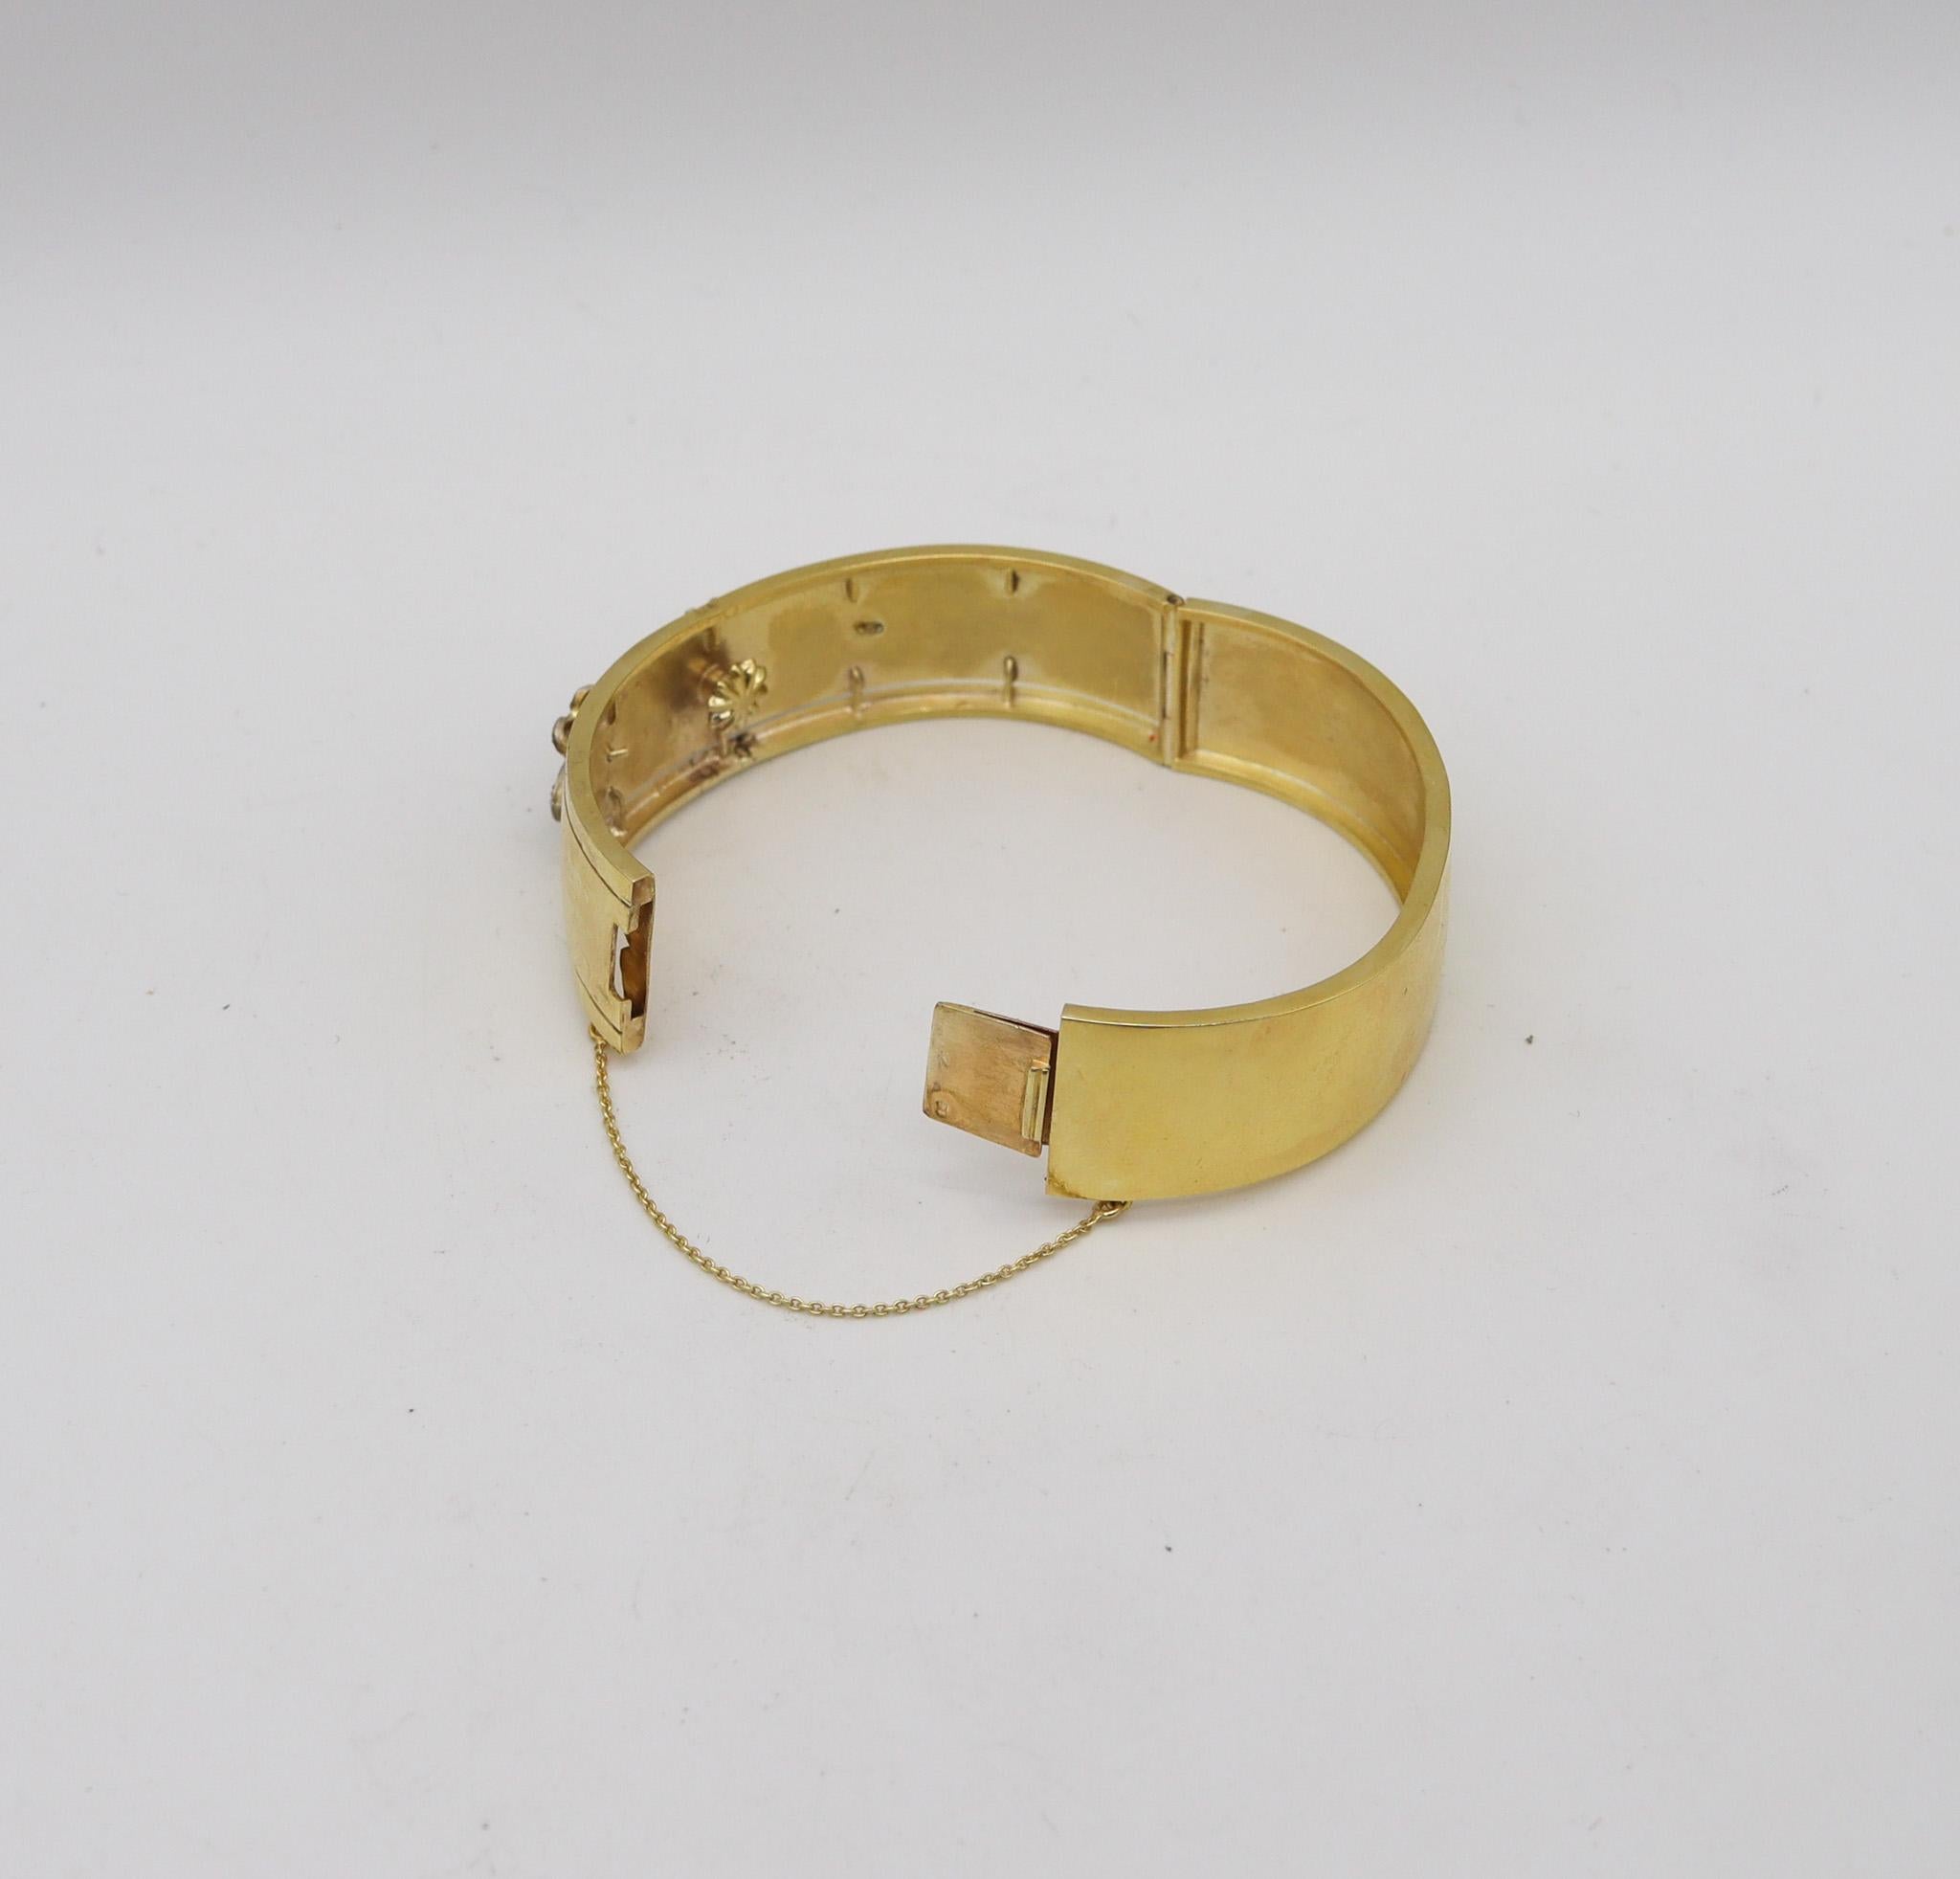 Women's French 1850 Victorian Bangle Bracelet In 14Kt Yellow Gold With Rose Cut Diamonds